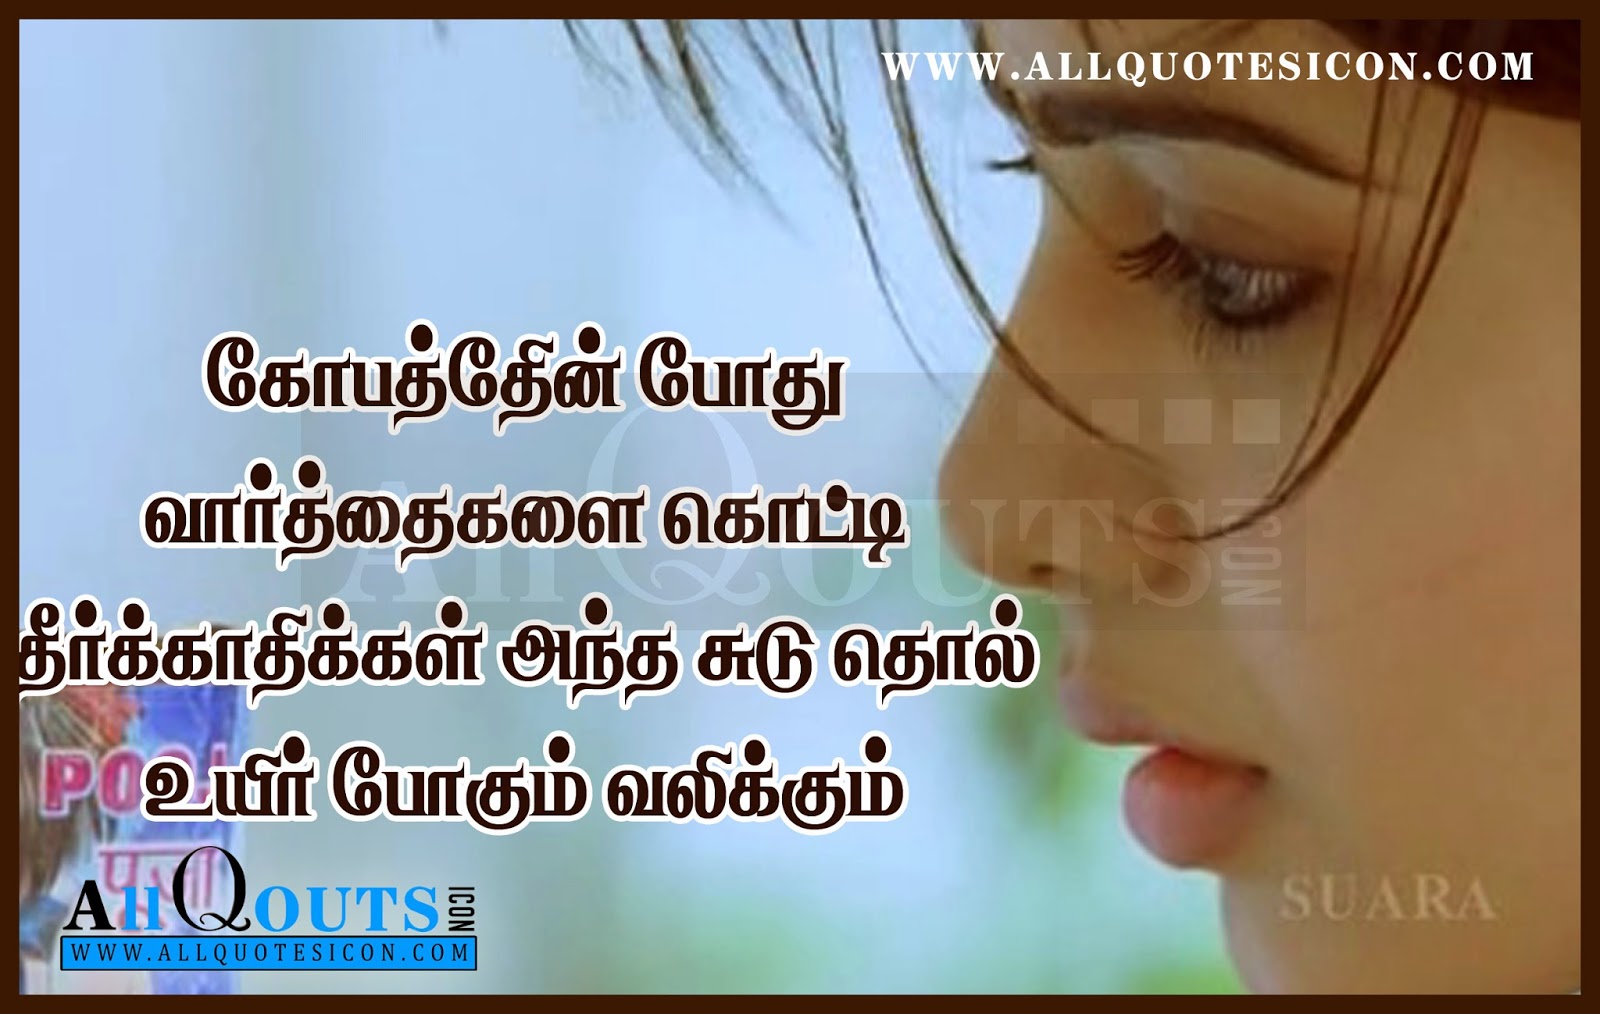 love Tamil quotes images wallpapers pictures photos sayings